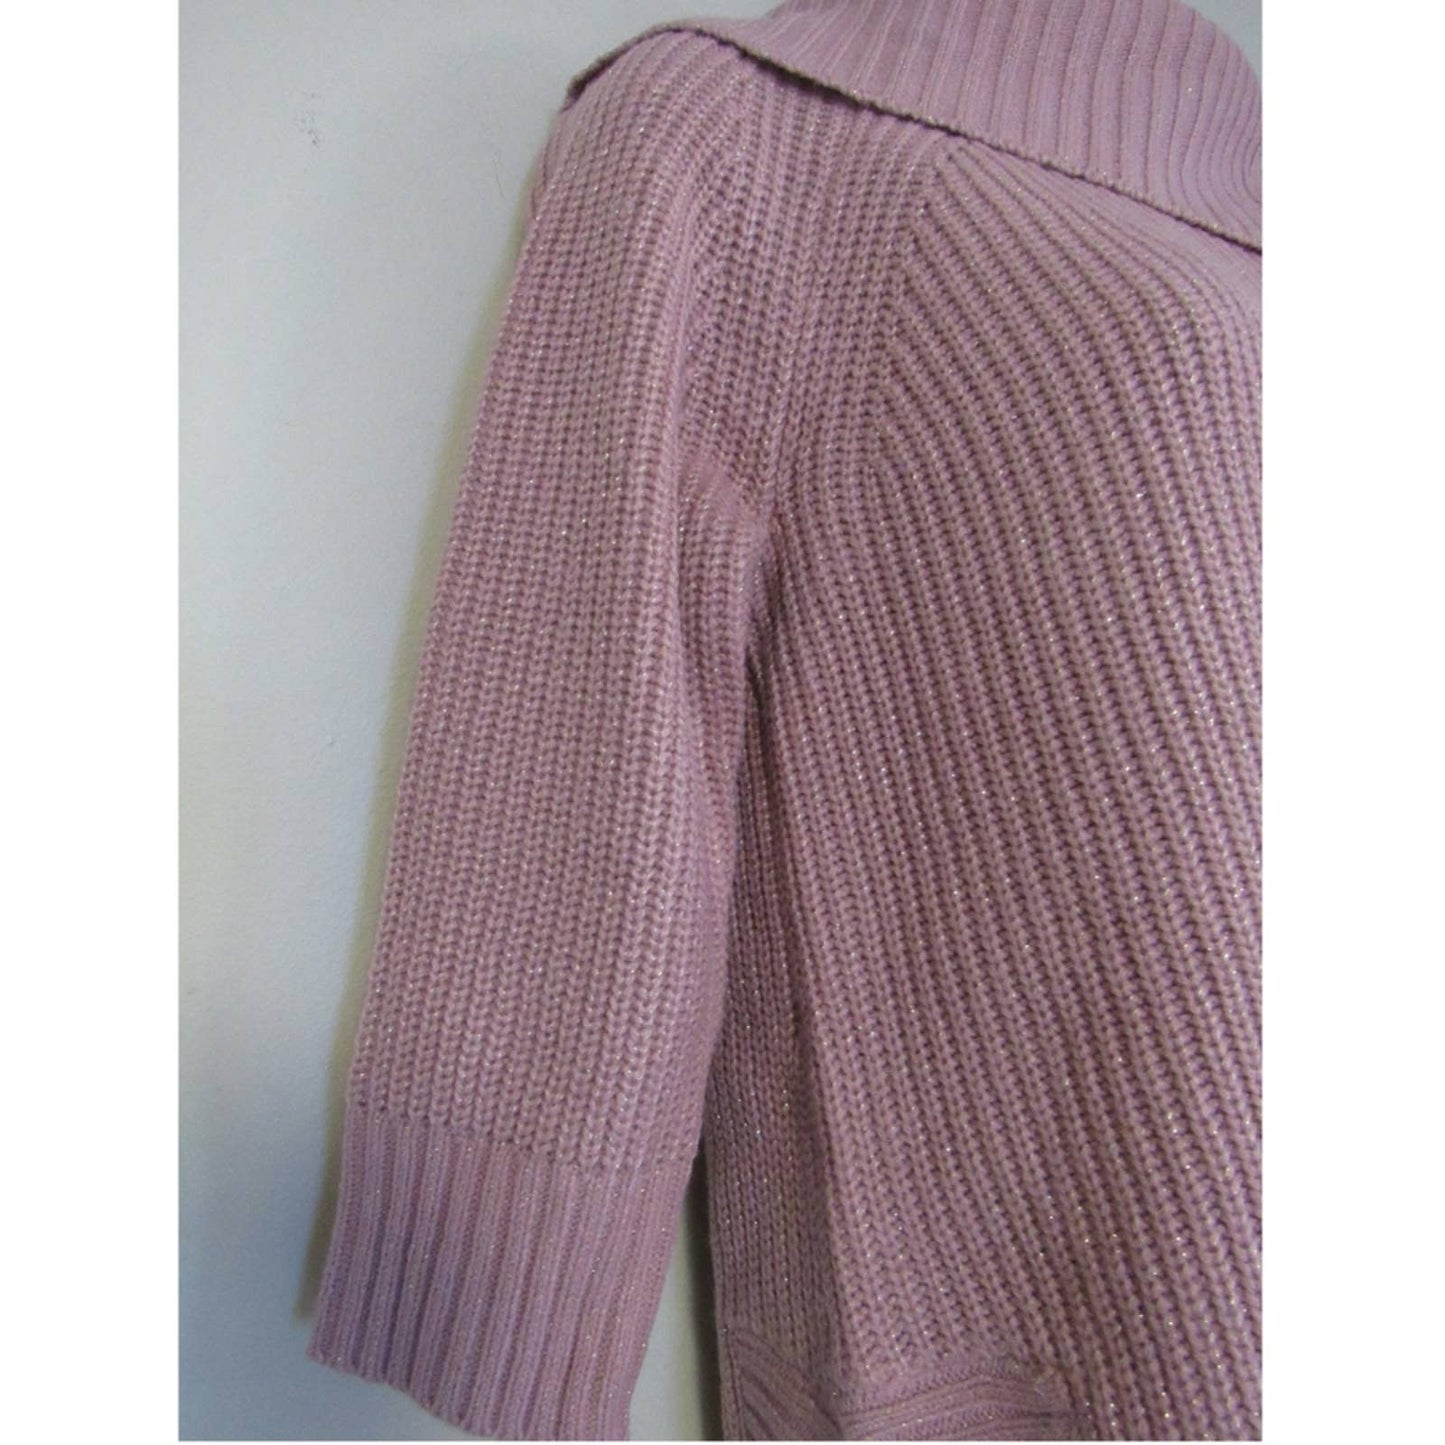 89th + Madison 3/4 Sleeve Button Detail Metallic Sweater Small Rose